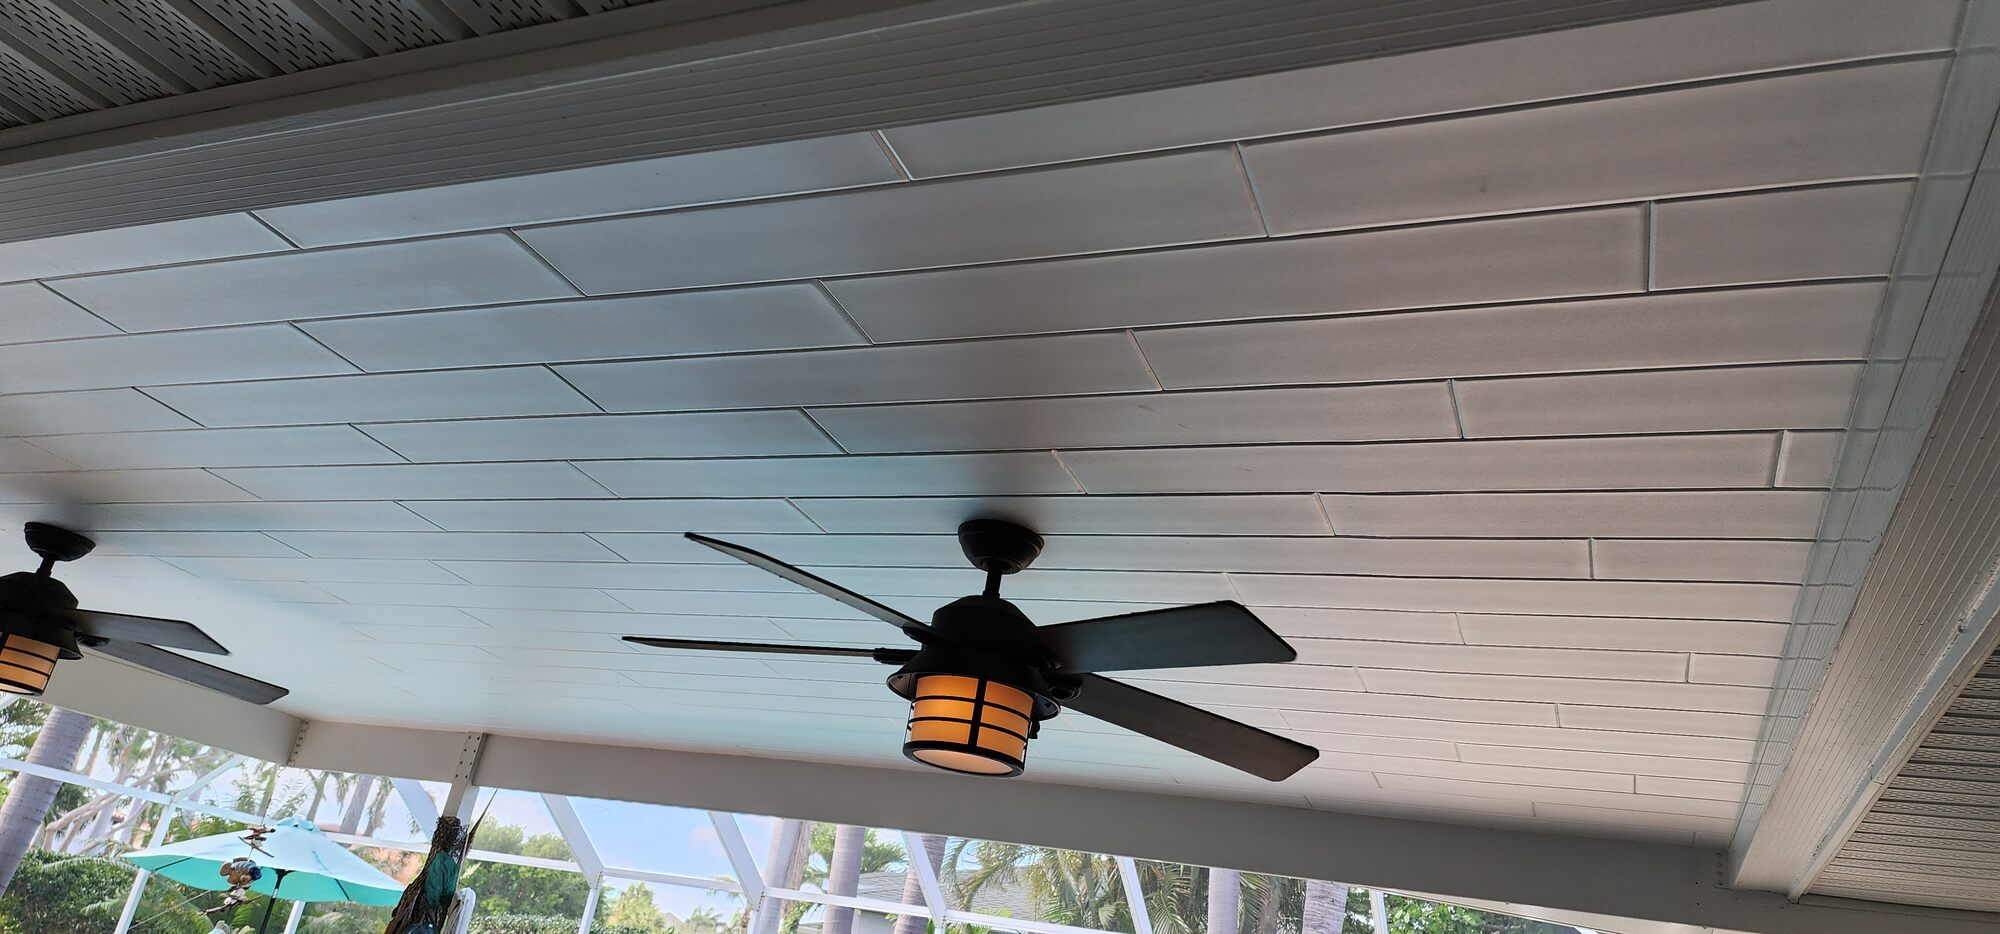 Installing Ceiling Planks For Porch In